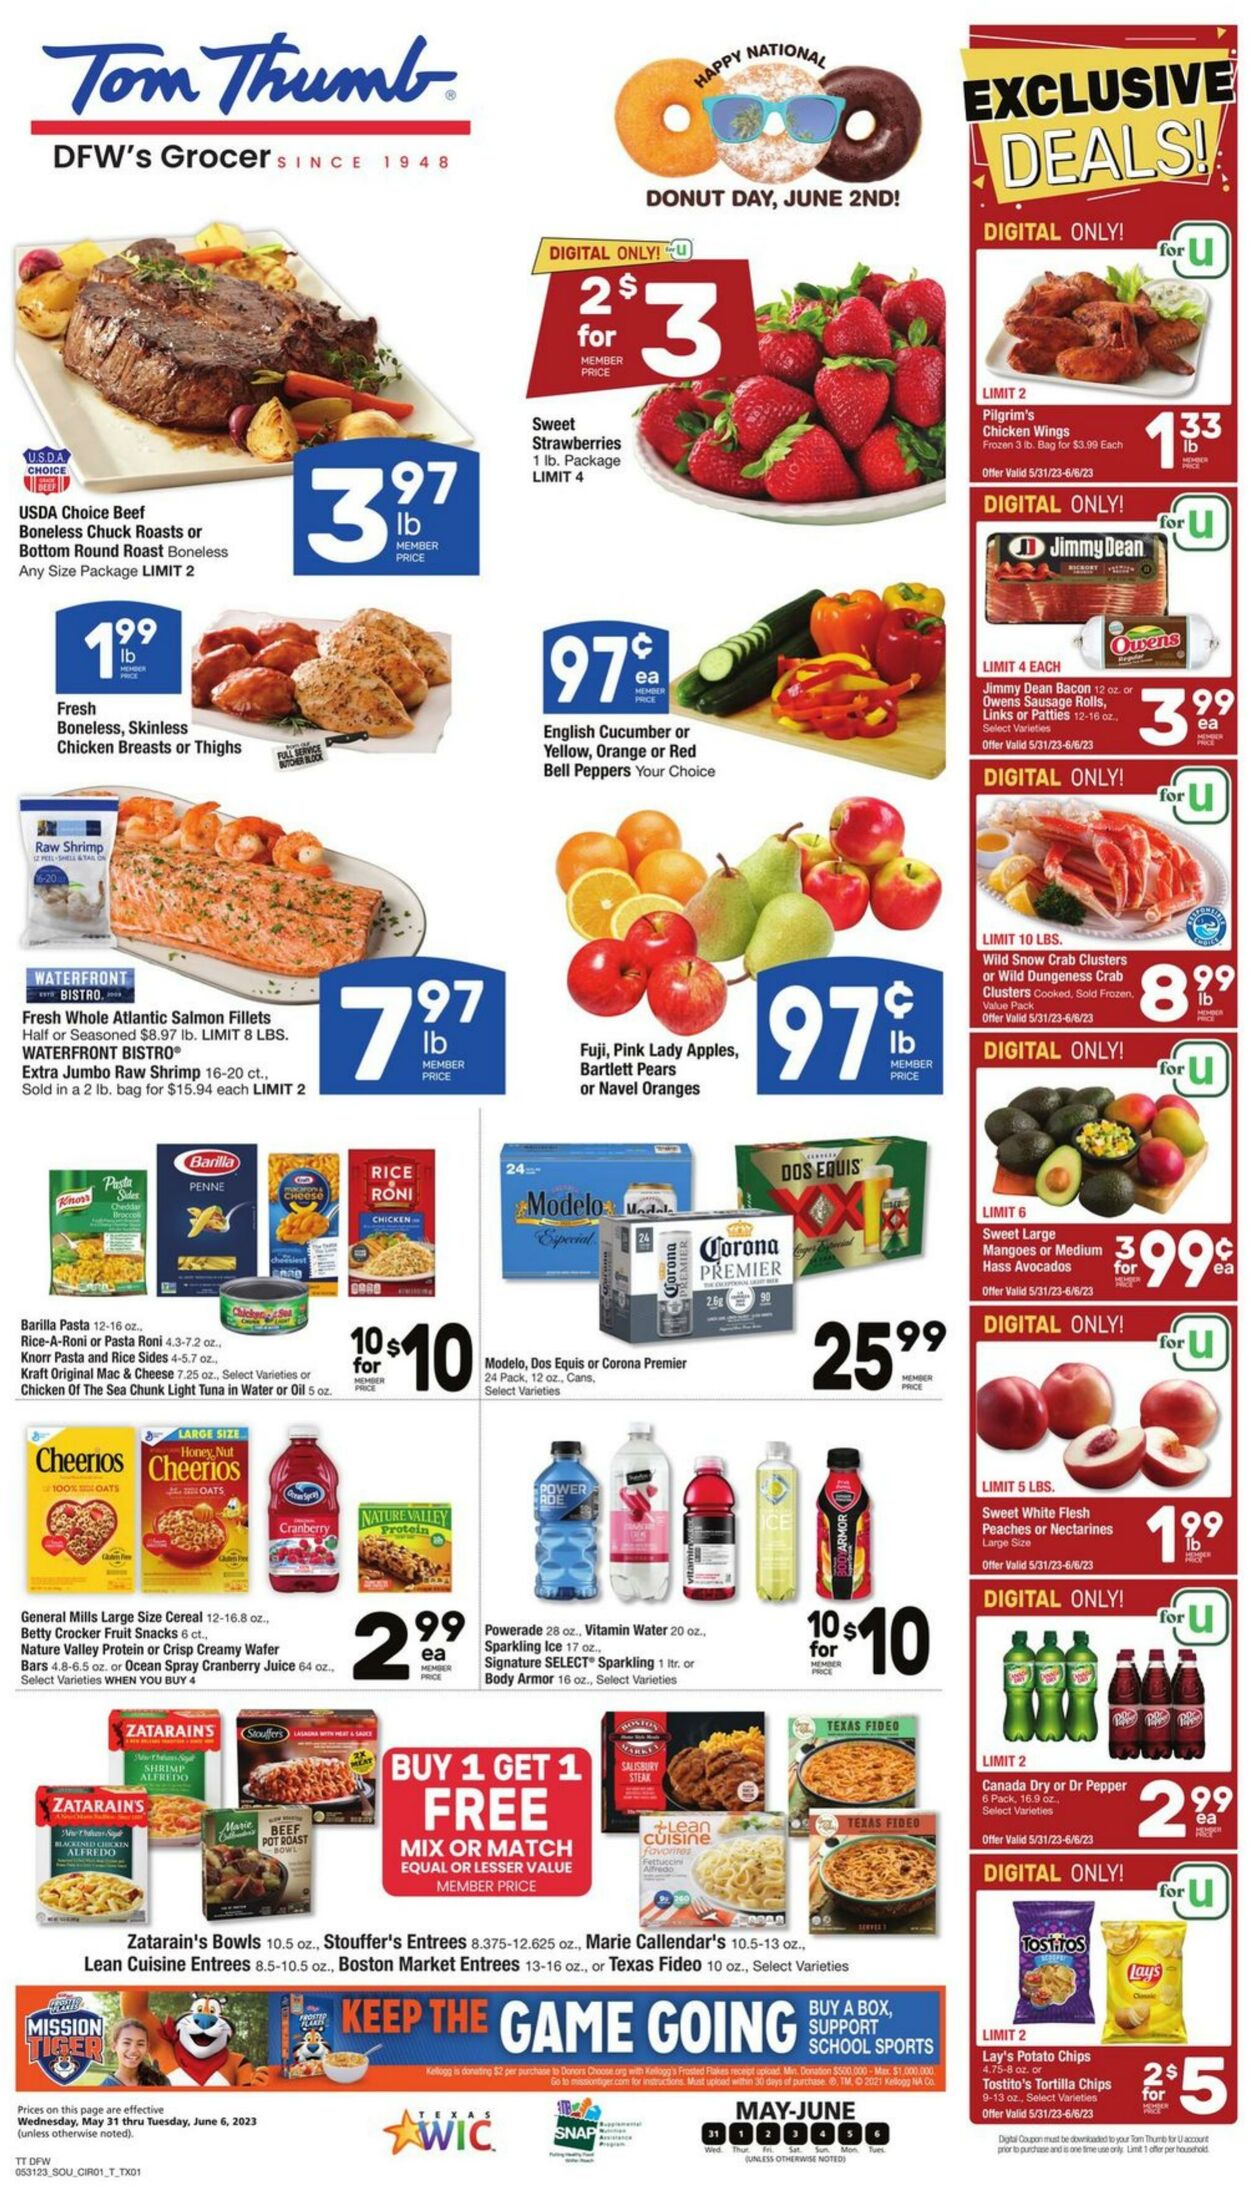 Tom Thumb Promotional weekly ads